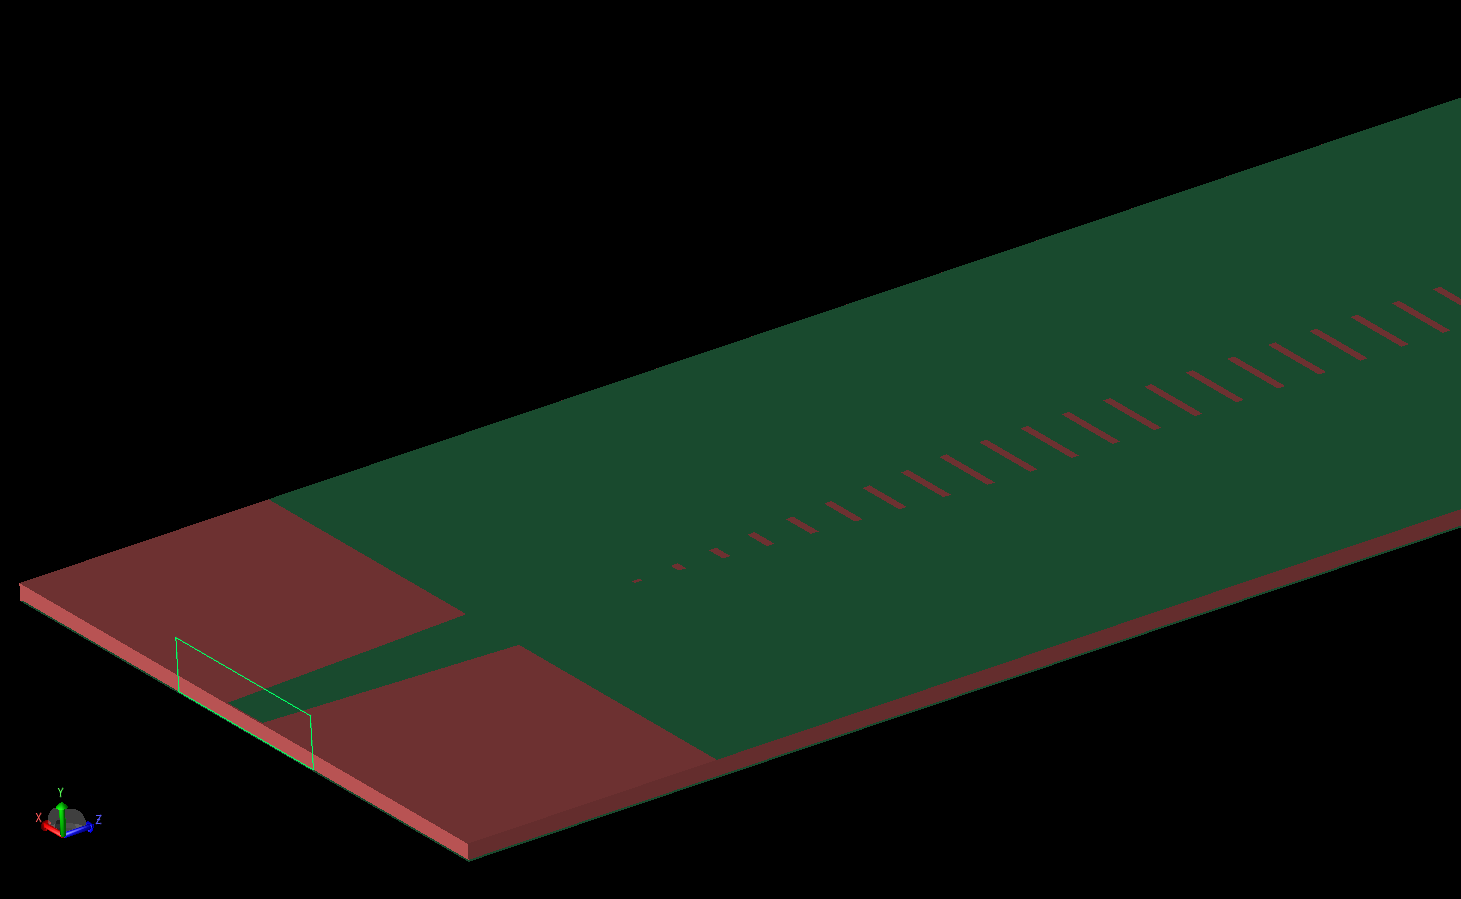 Figure 3: An angled view of the antenna from one port shows the nodal waveguide port attached to the tapered line, the thickness of the substrate layer, and a portion of the slotted top layer.